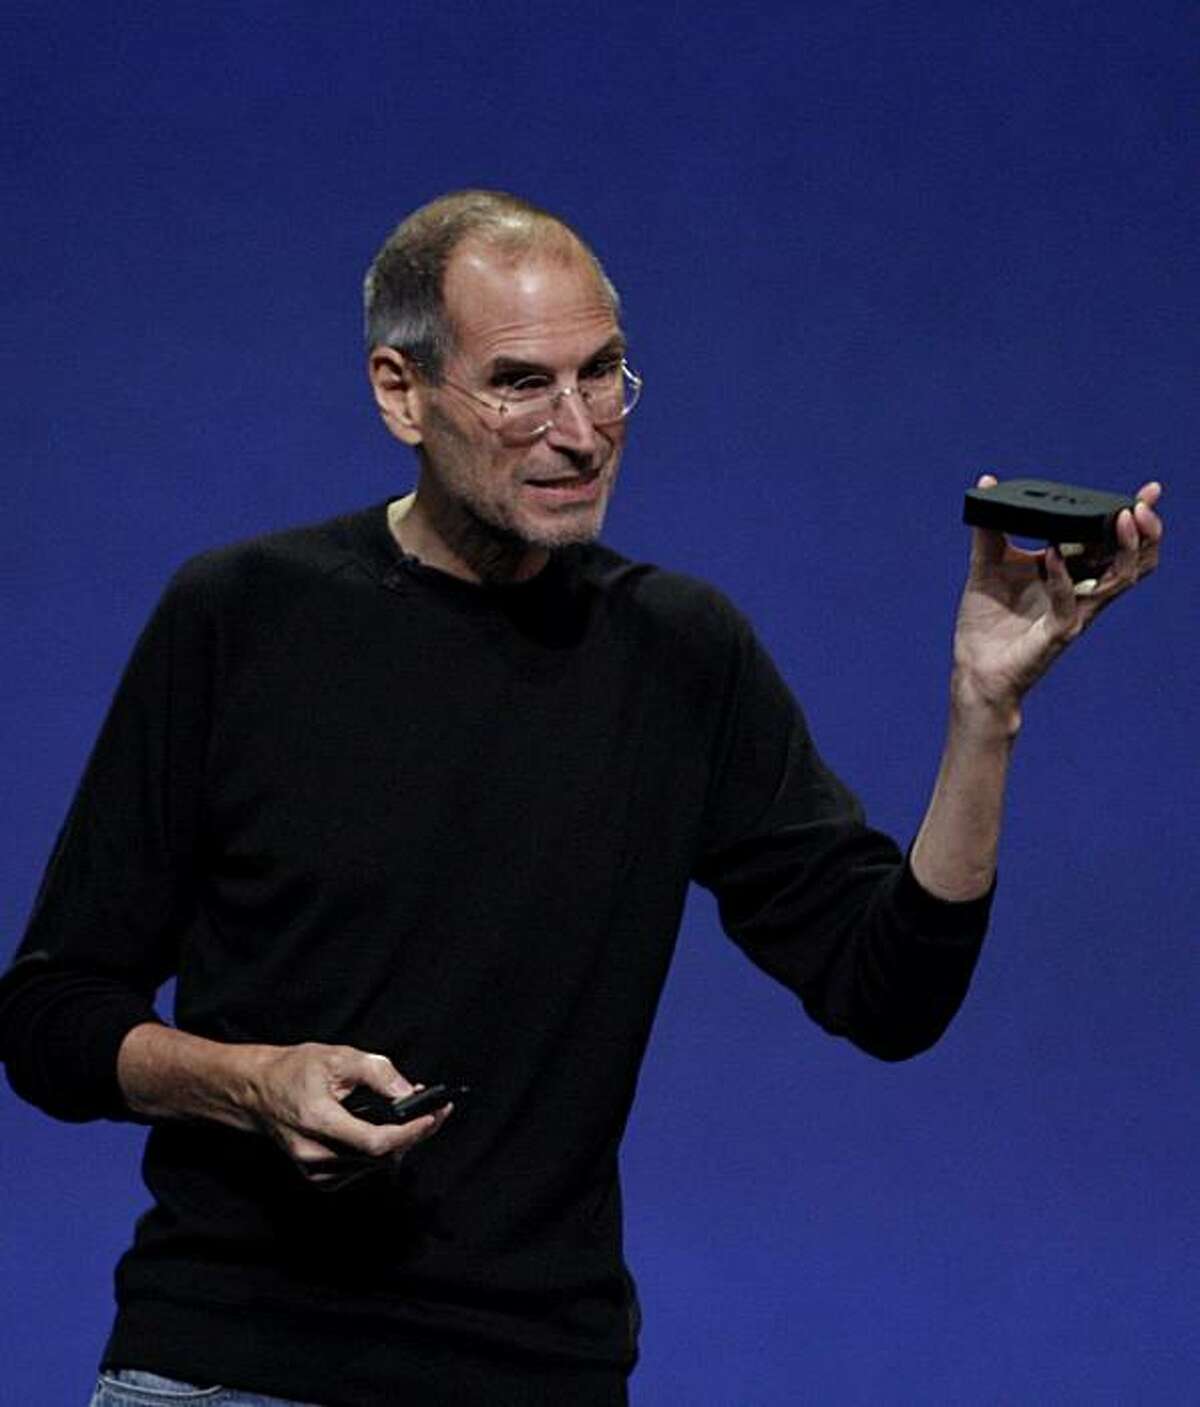 Apple CEO Steve Jobs introduces the newest version of the Apple TV device at the Yerba Buena Center for the Arts in San Francisco, Calif. on Wednesday, Sept. 1, 2010.